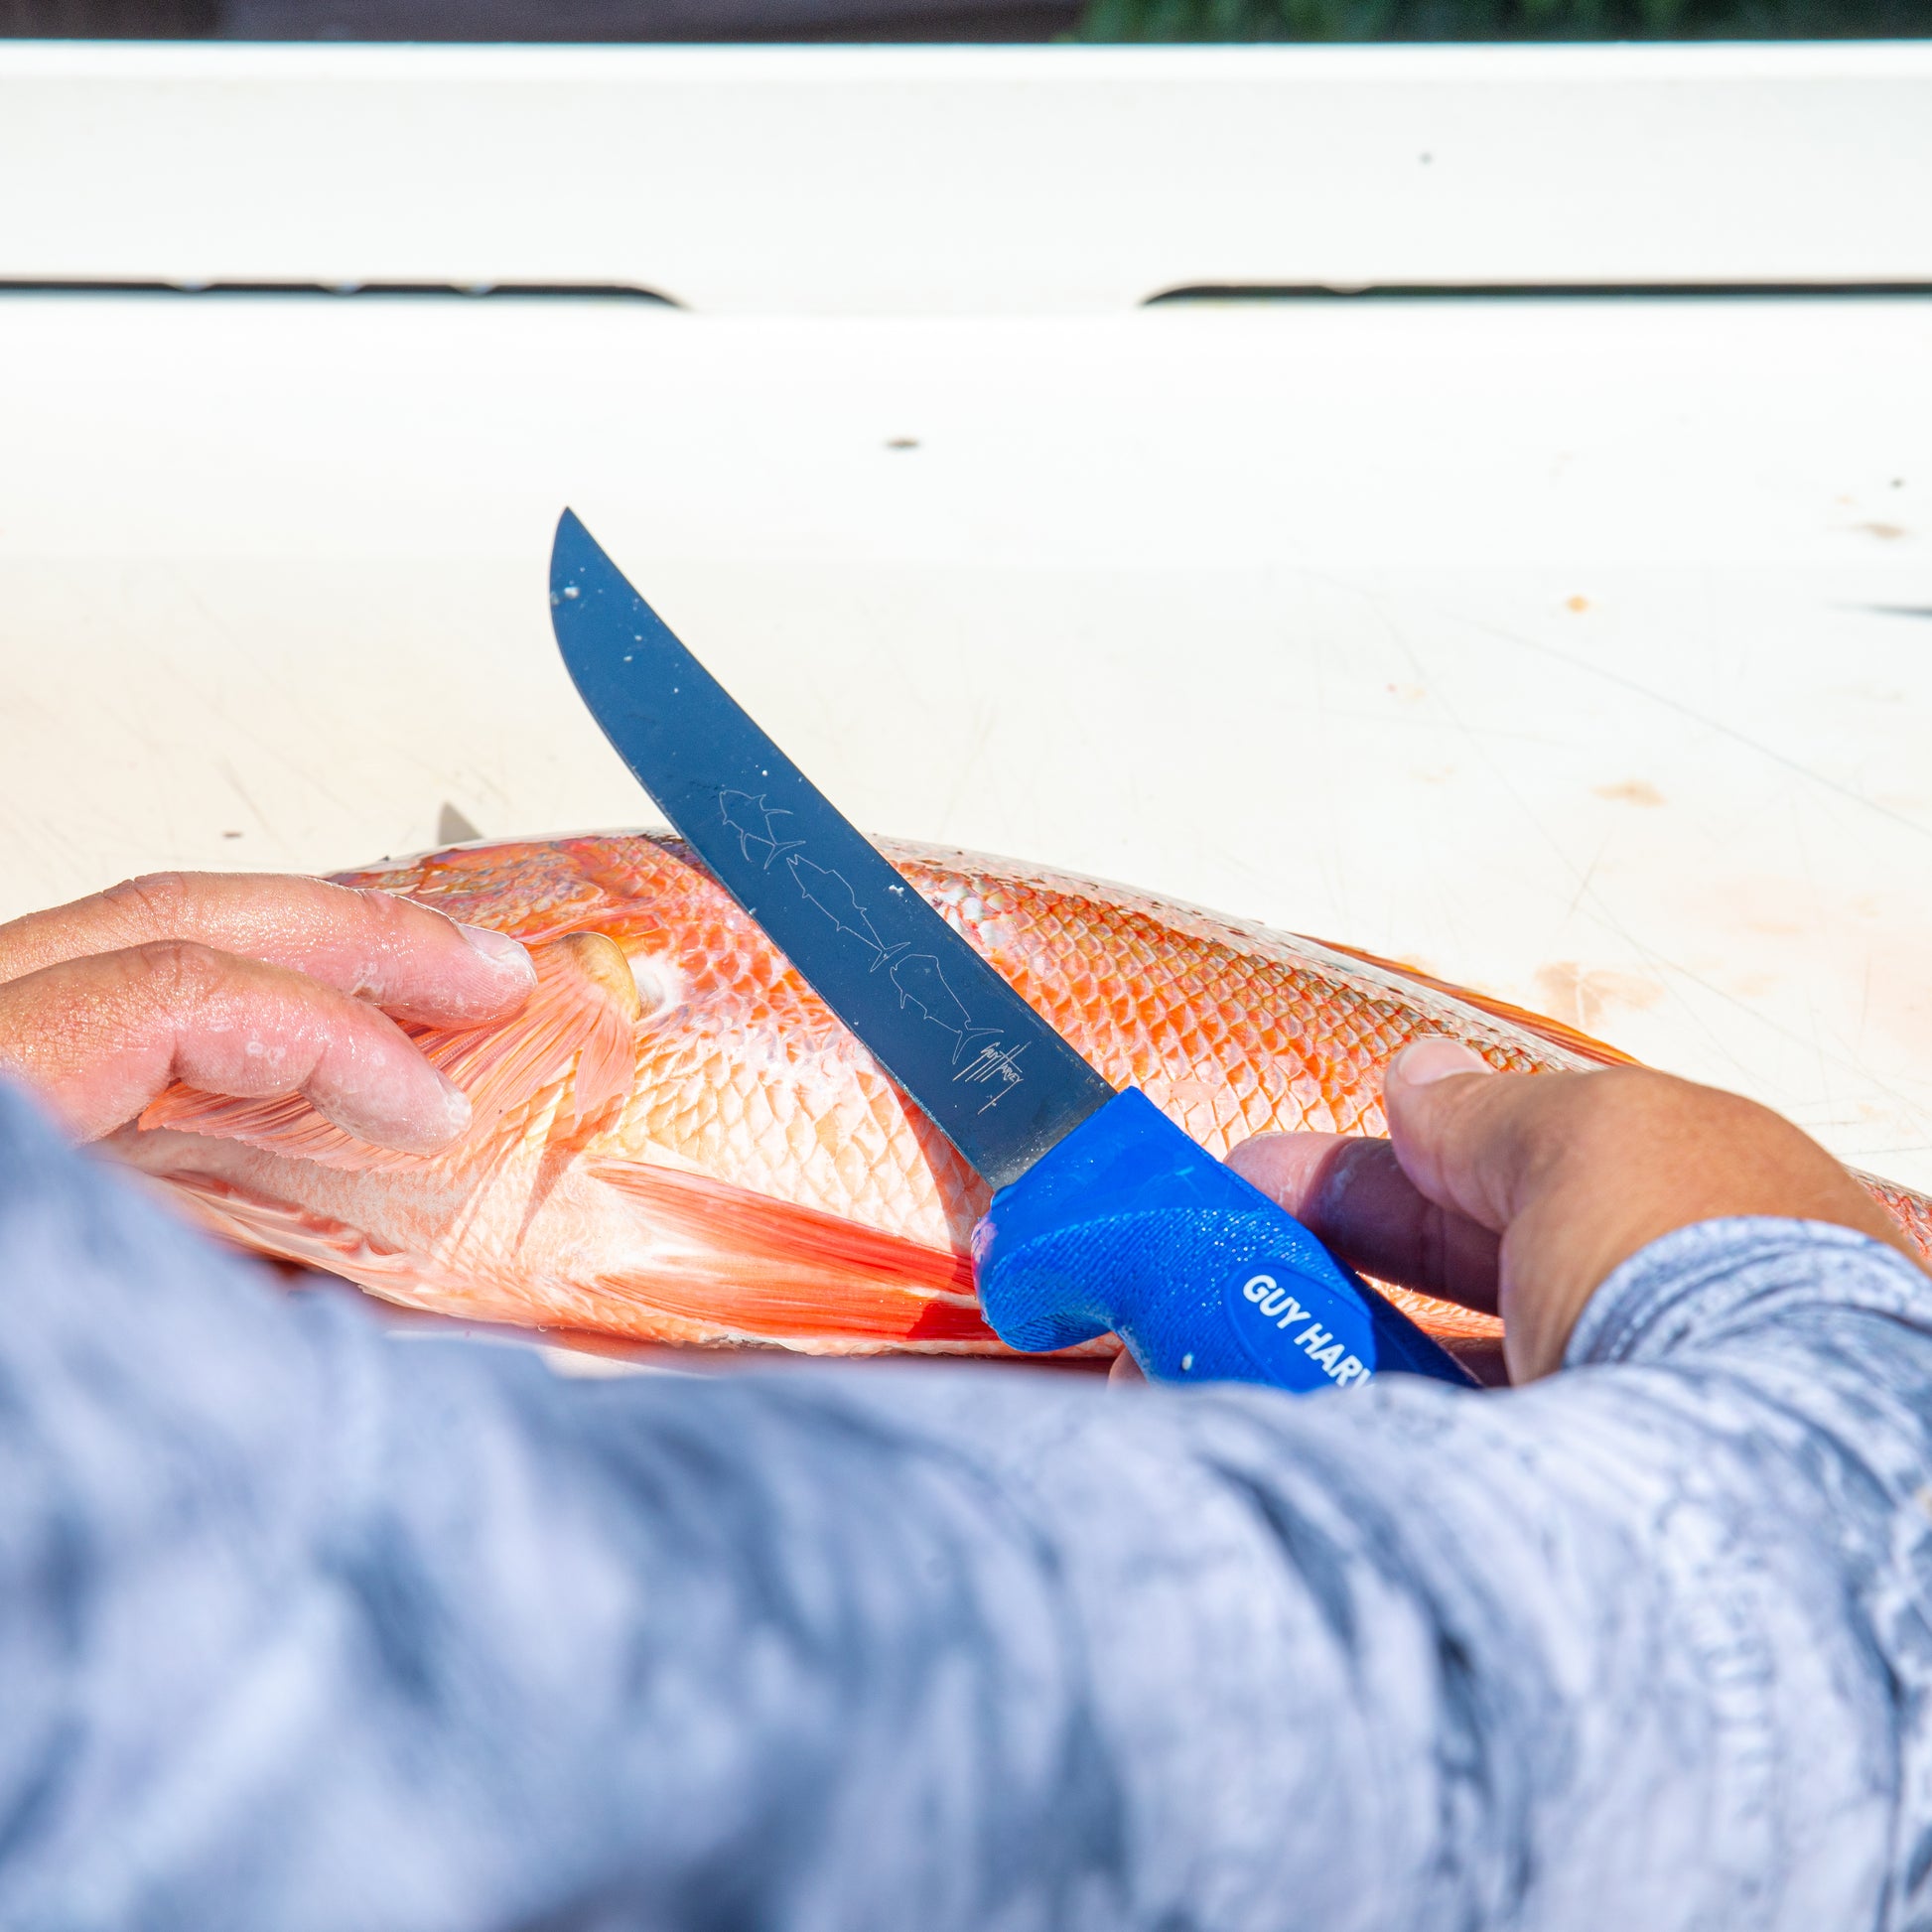 Guy Harvey | 8 Wide, Stiff Flexible Fillet Knife with SofGrip Handle